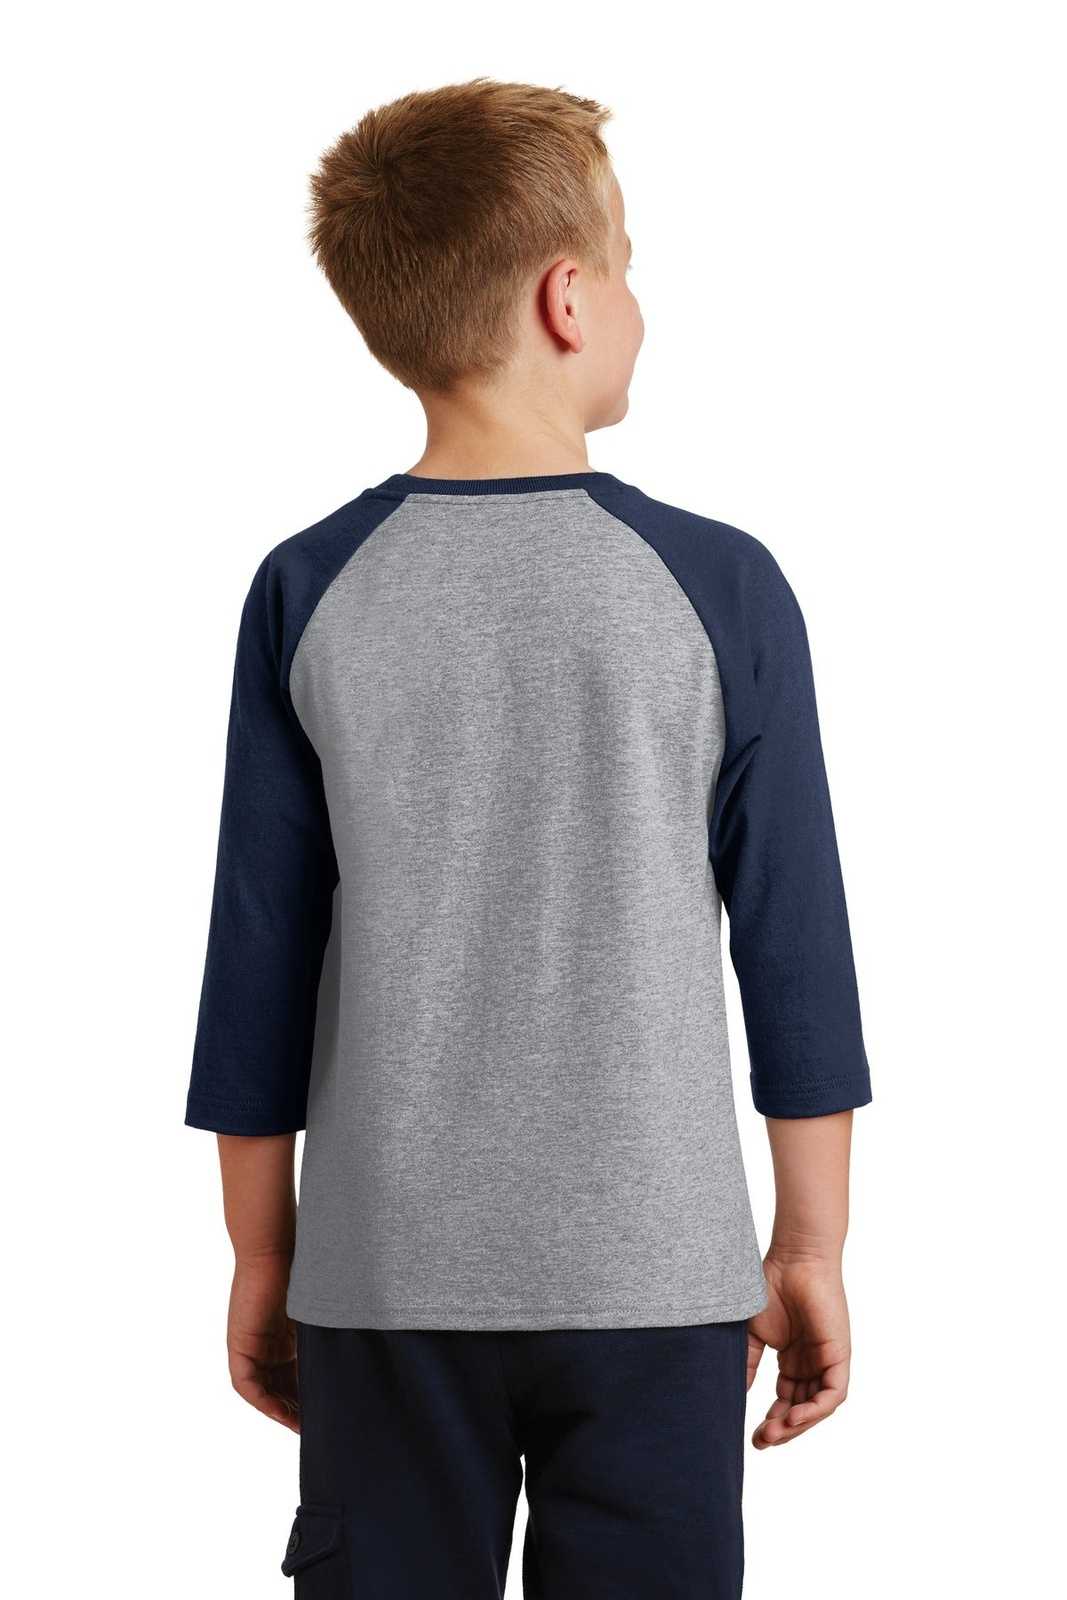 Port & Company PC55YRS Youth Core Blend 3/4-Sleeve Raglan Tee - Athletic Heather Navy - HIT a Double - 1